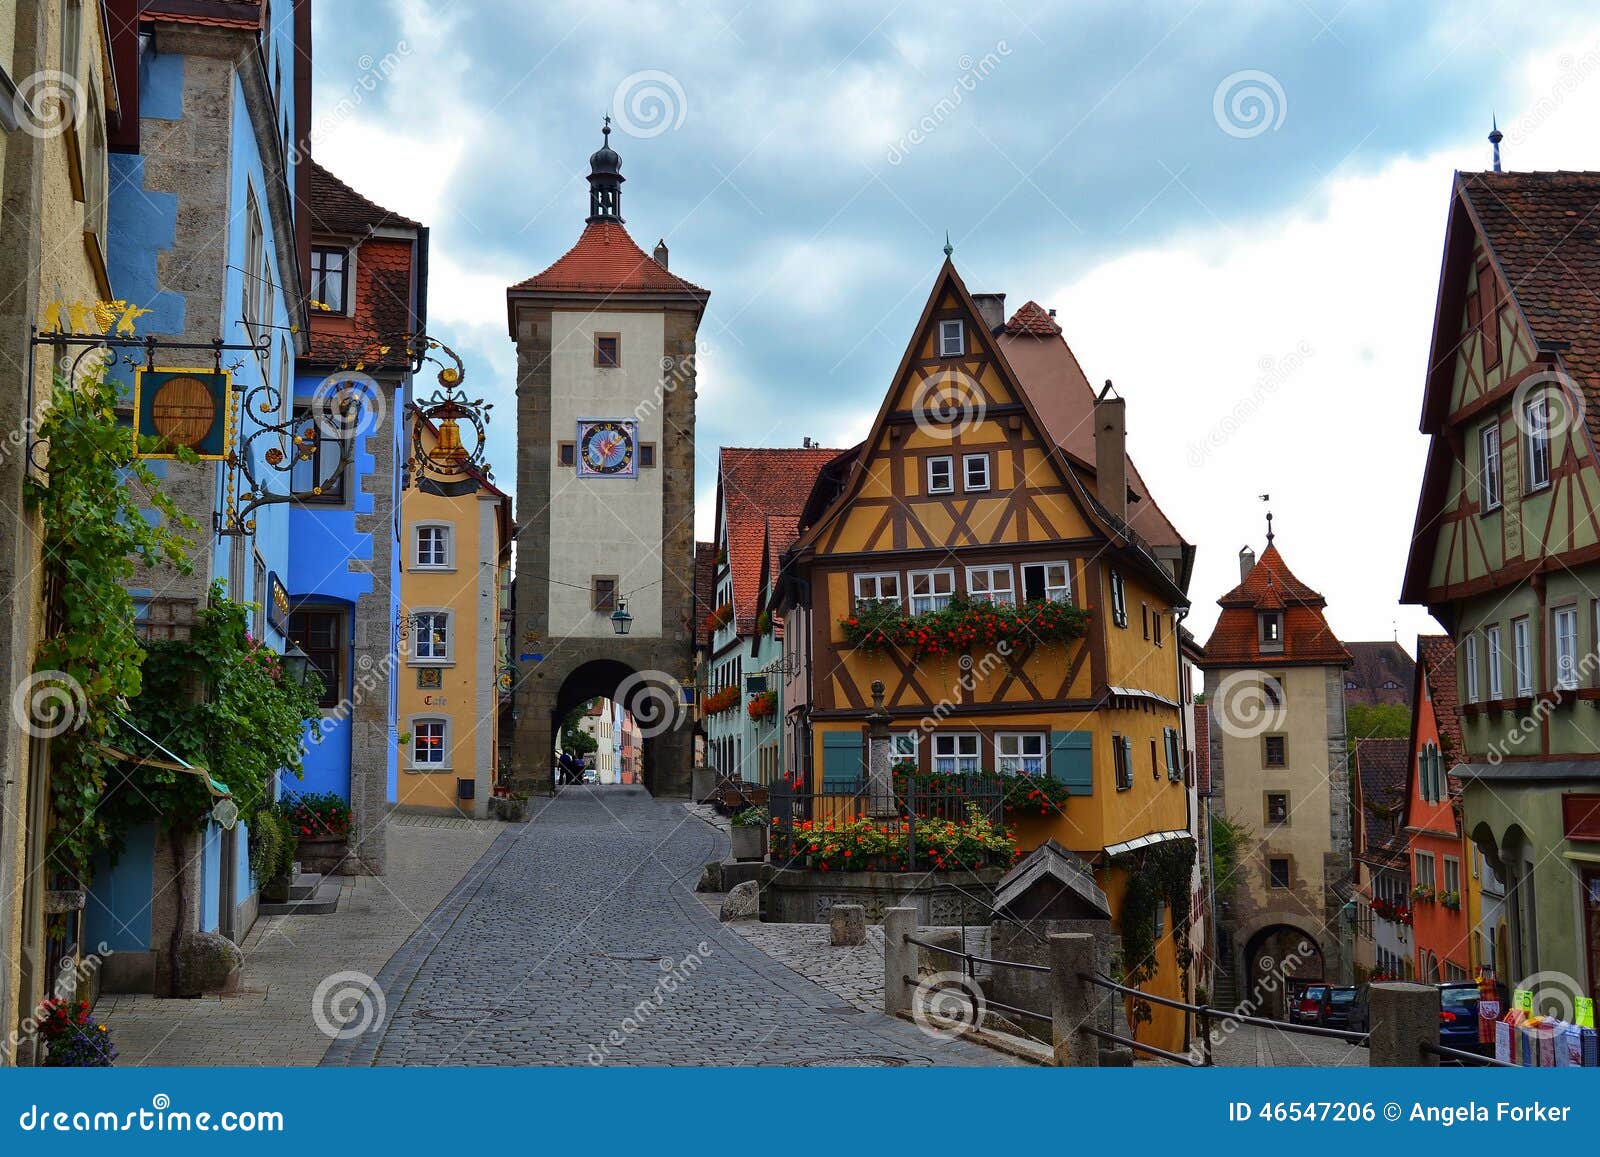 most famous view of rothenburg ob der tauber